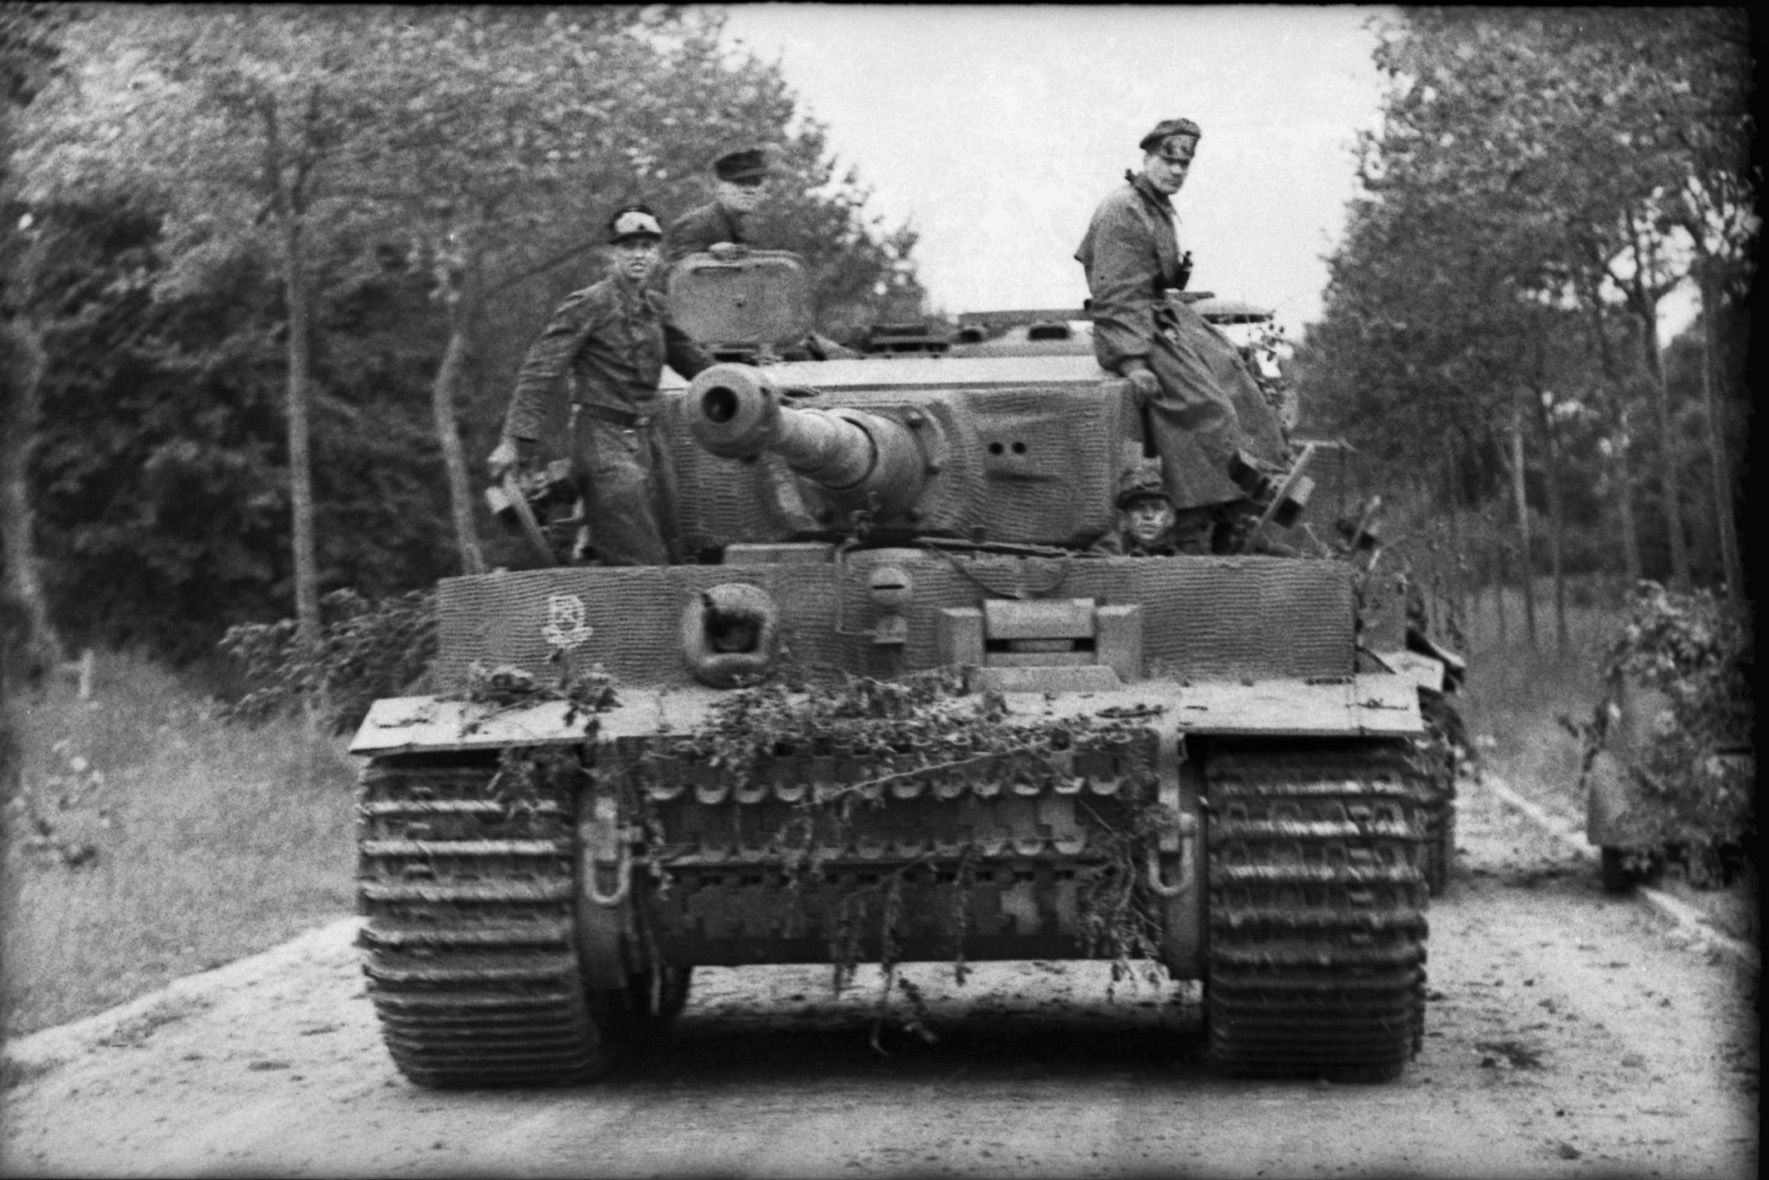 A German Tiger I tank rumbles along a road near Villers-Bocage, a key objective west of Caen. Two companies of Heavy Tank Battalion 101, a Waffen SS unit, on June 13 ambushed tank columns of the British 7th Armored Division.